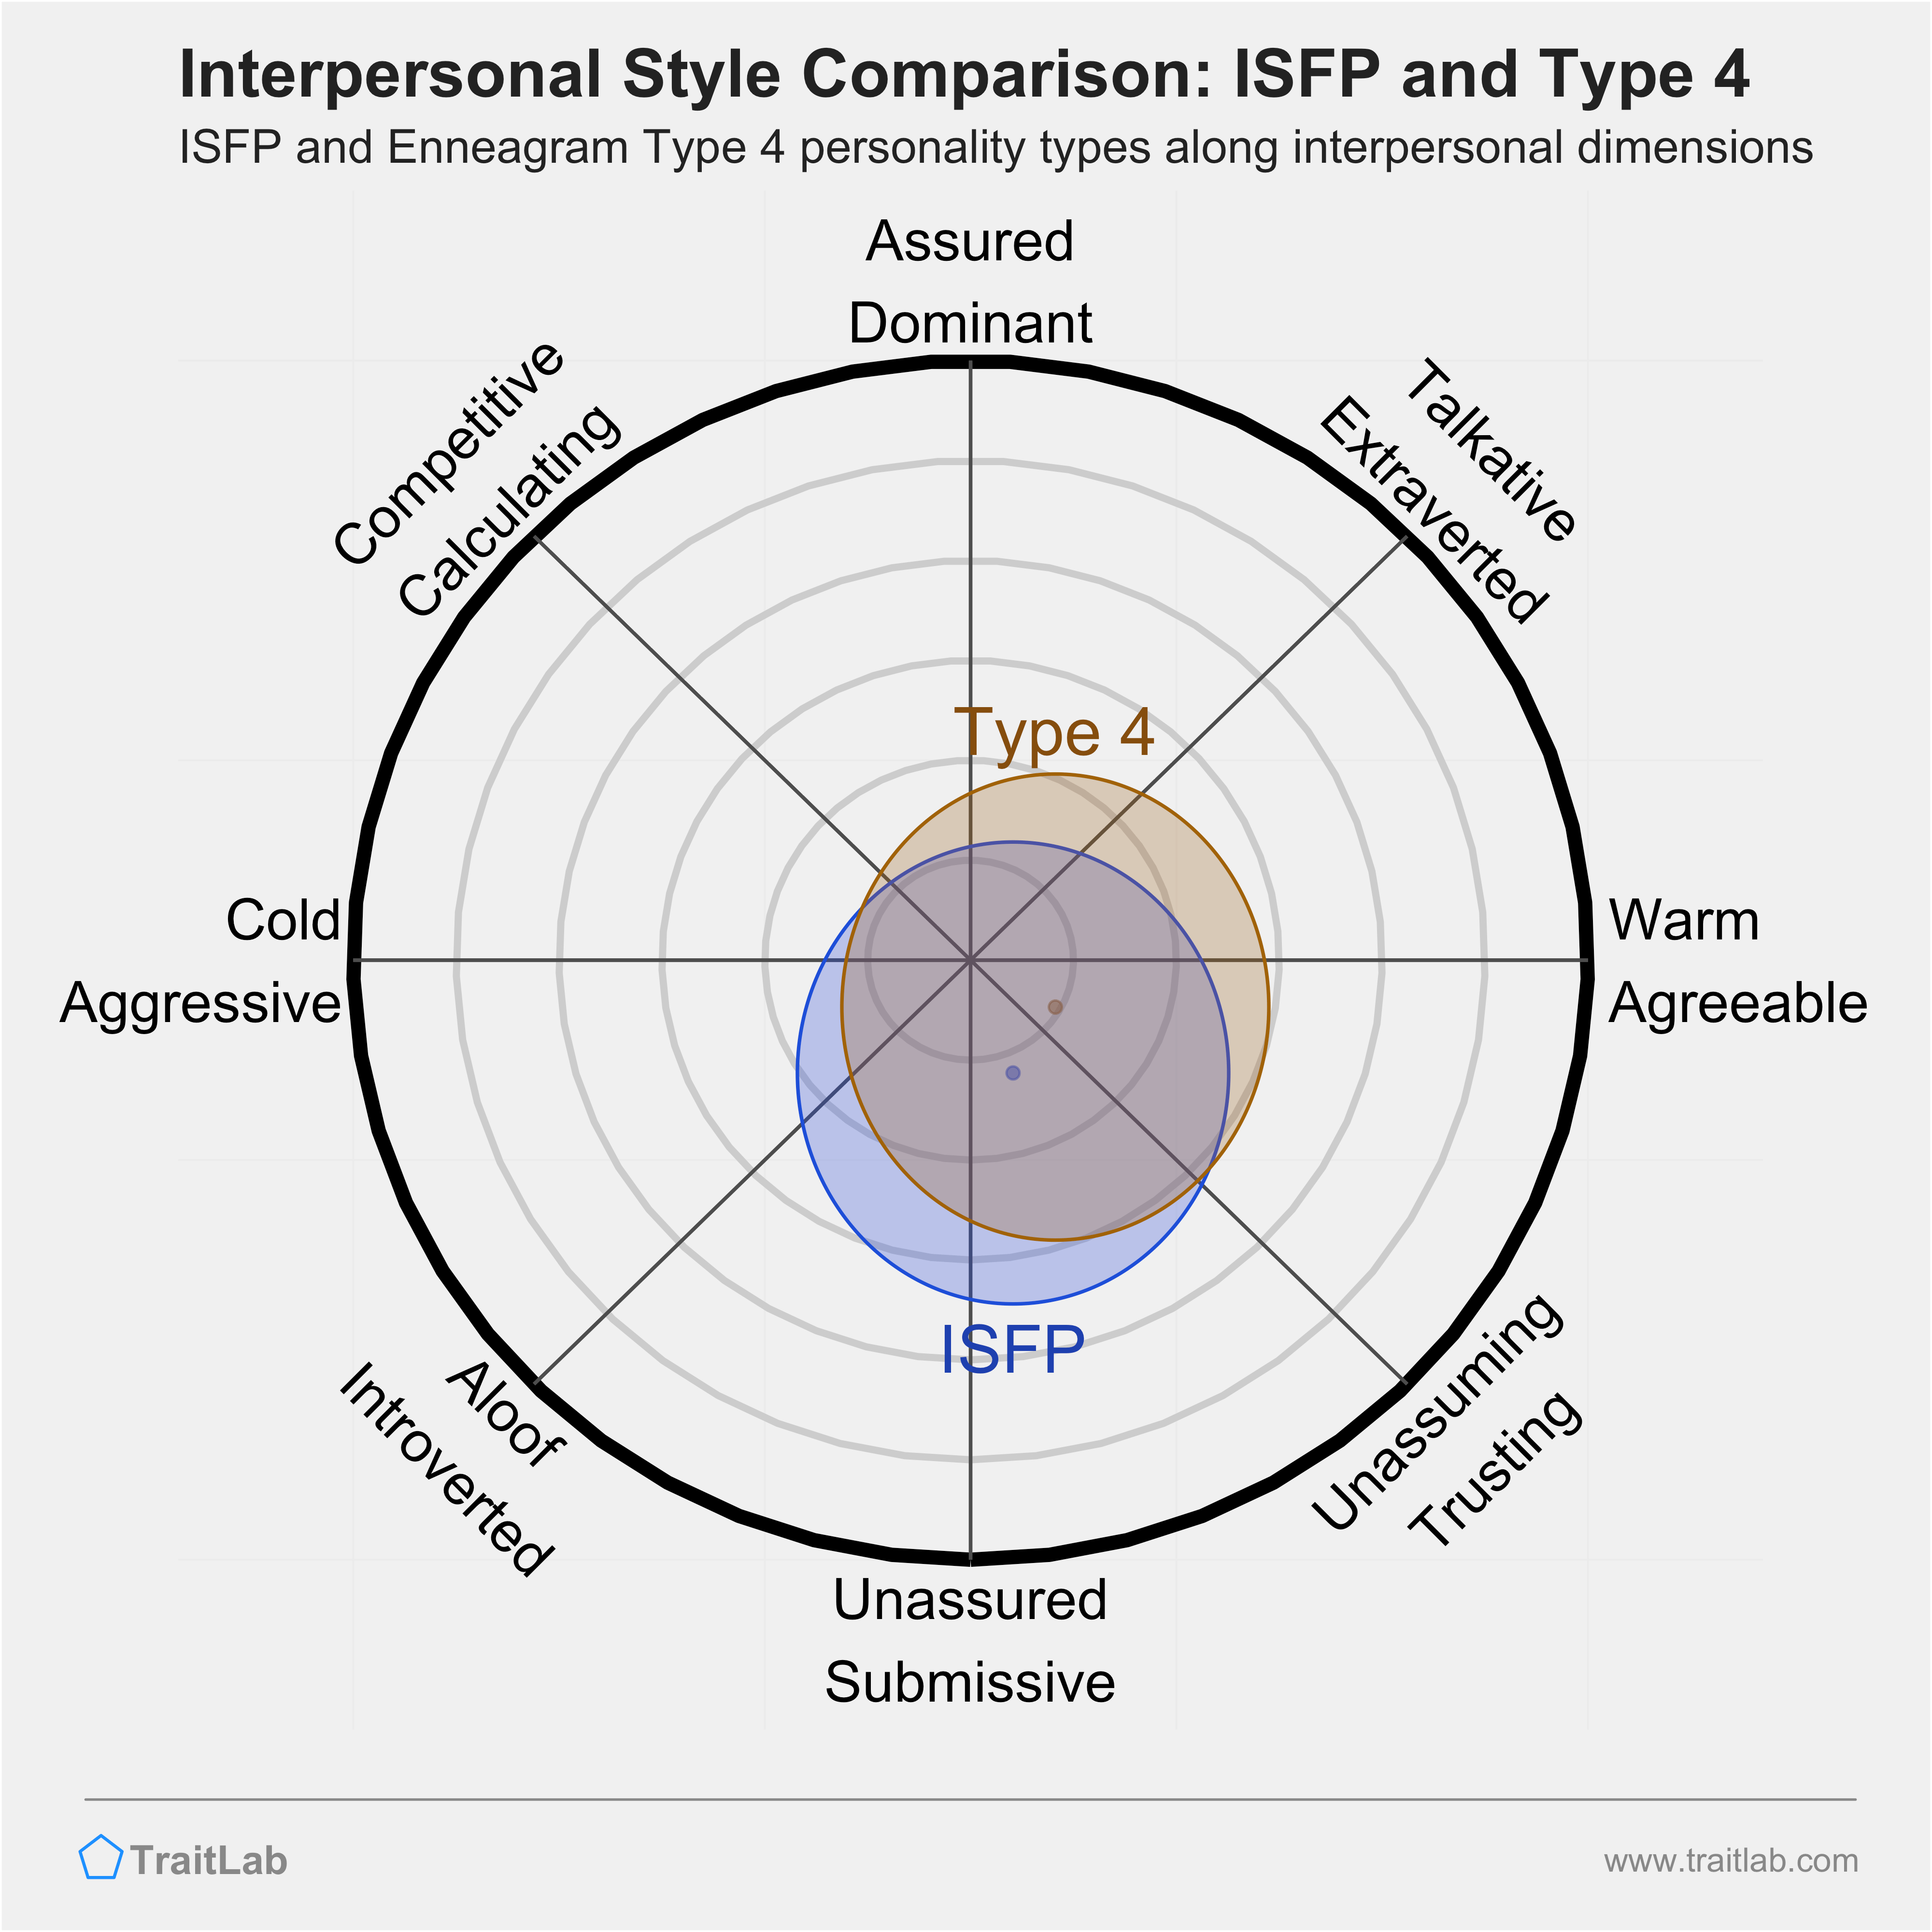 Enneagram ISFP and Type 4 comparison across interpersonal dimensions